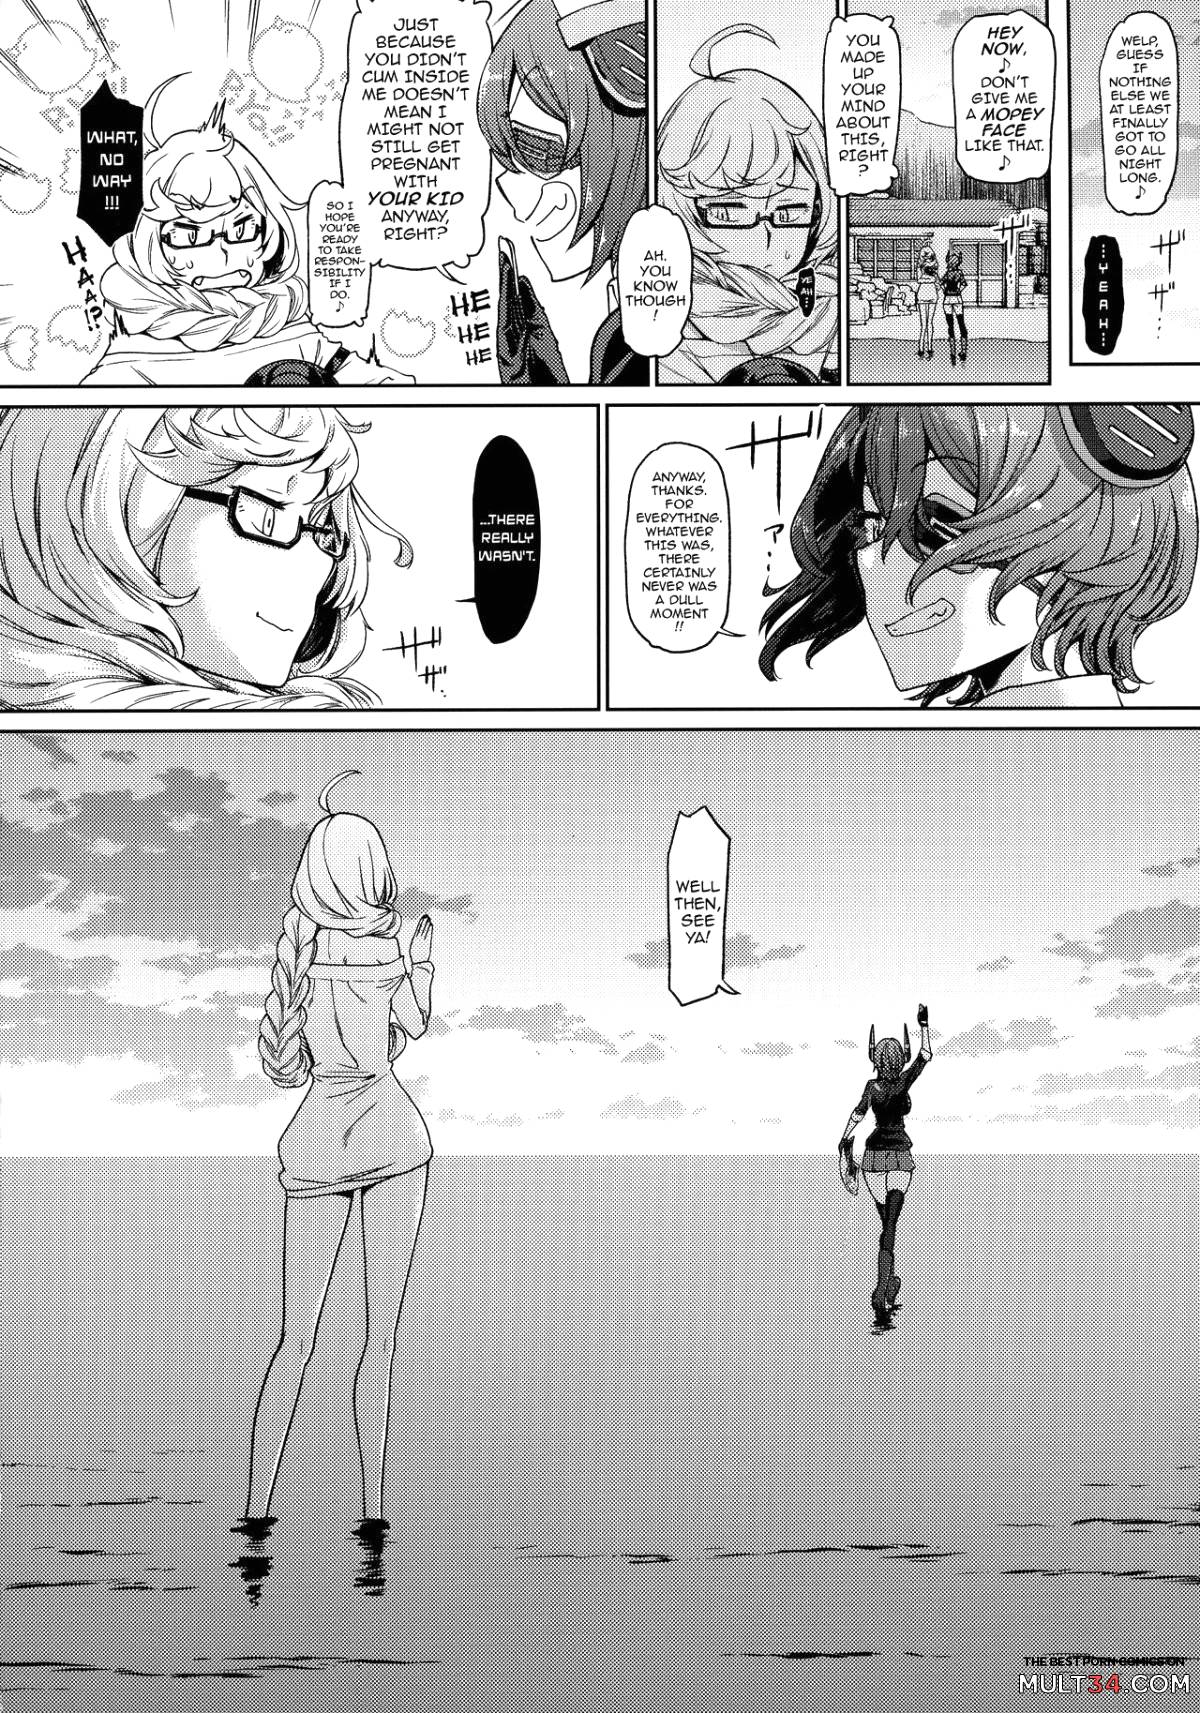 I Told You Supply Depot, This Tenryuu Belongs to You!! page 43